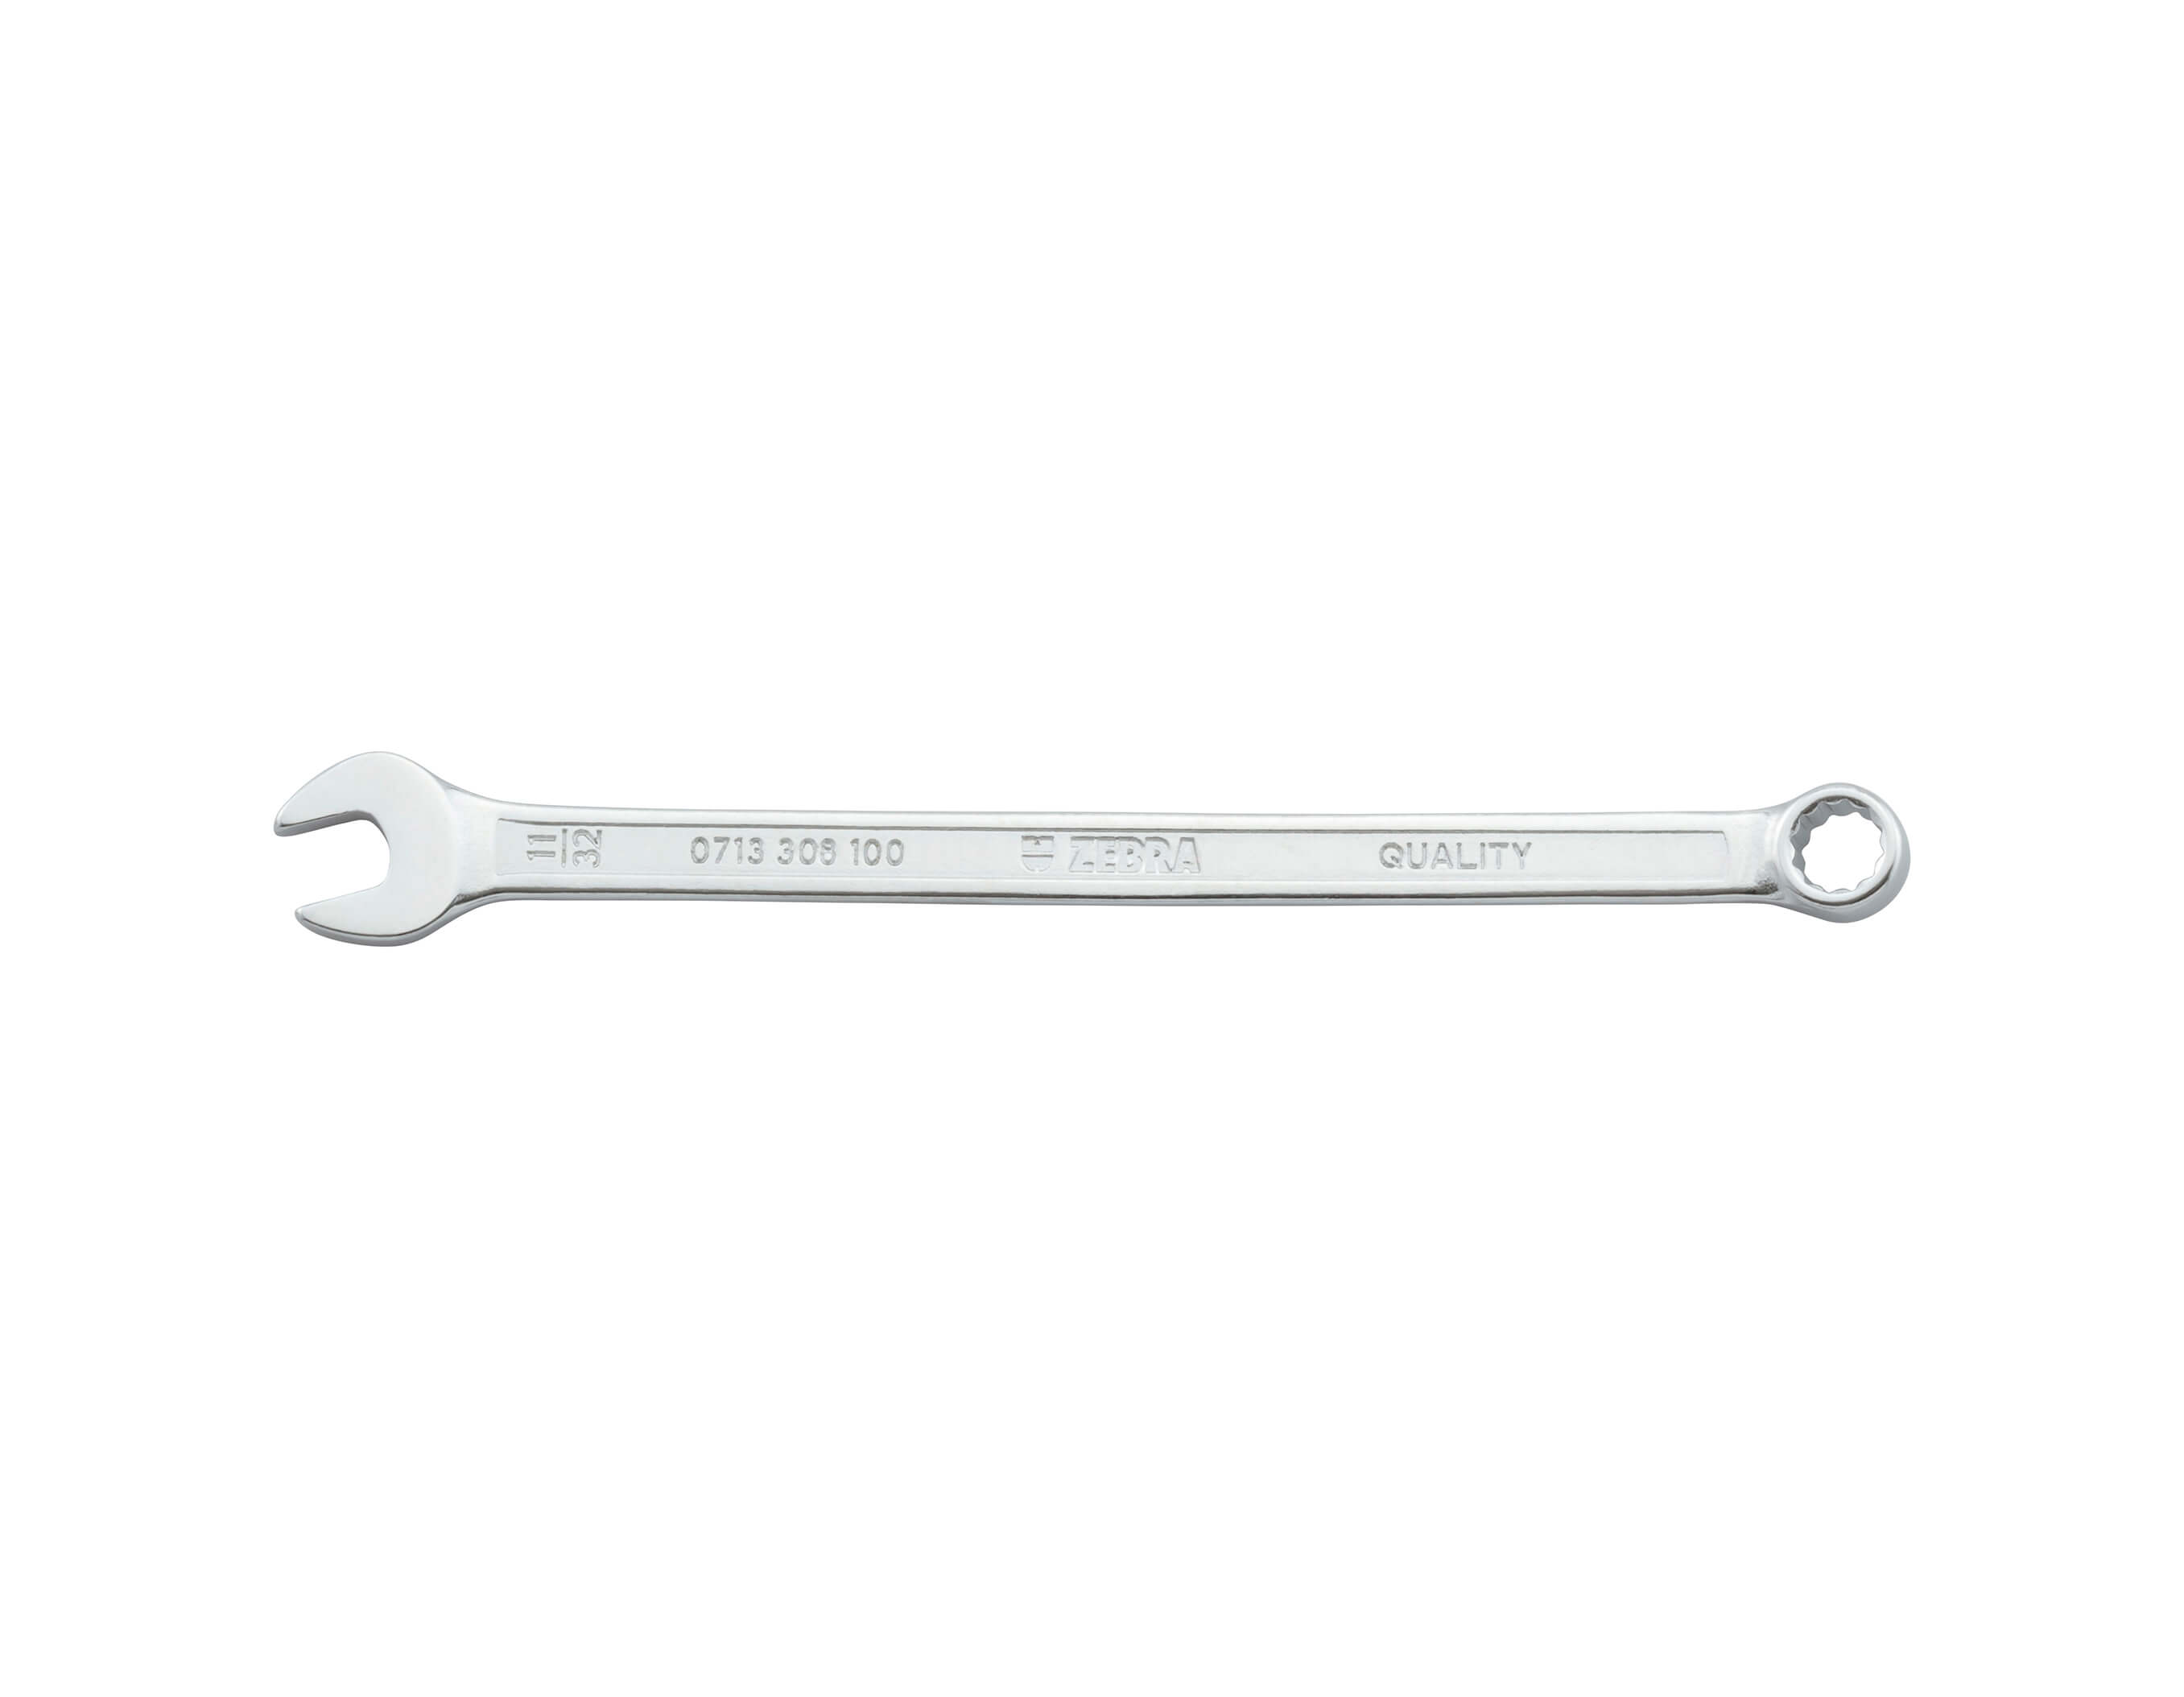 Combination wrench extra long 7/8"